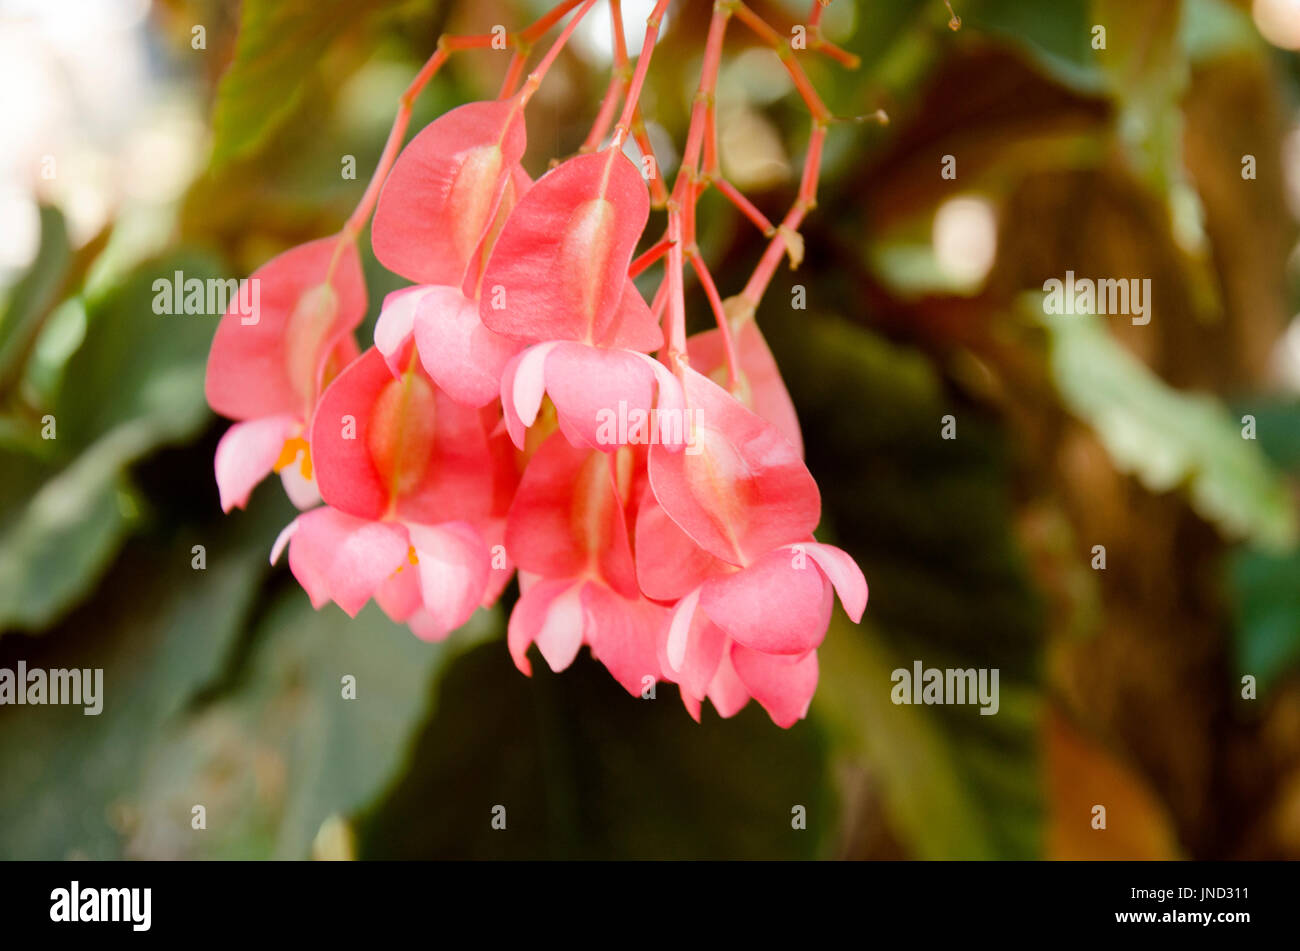 Movement of pink and red flower from motion of wind in garden Stock Photo